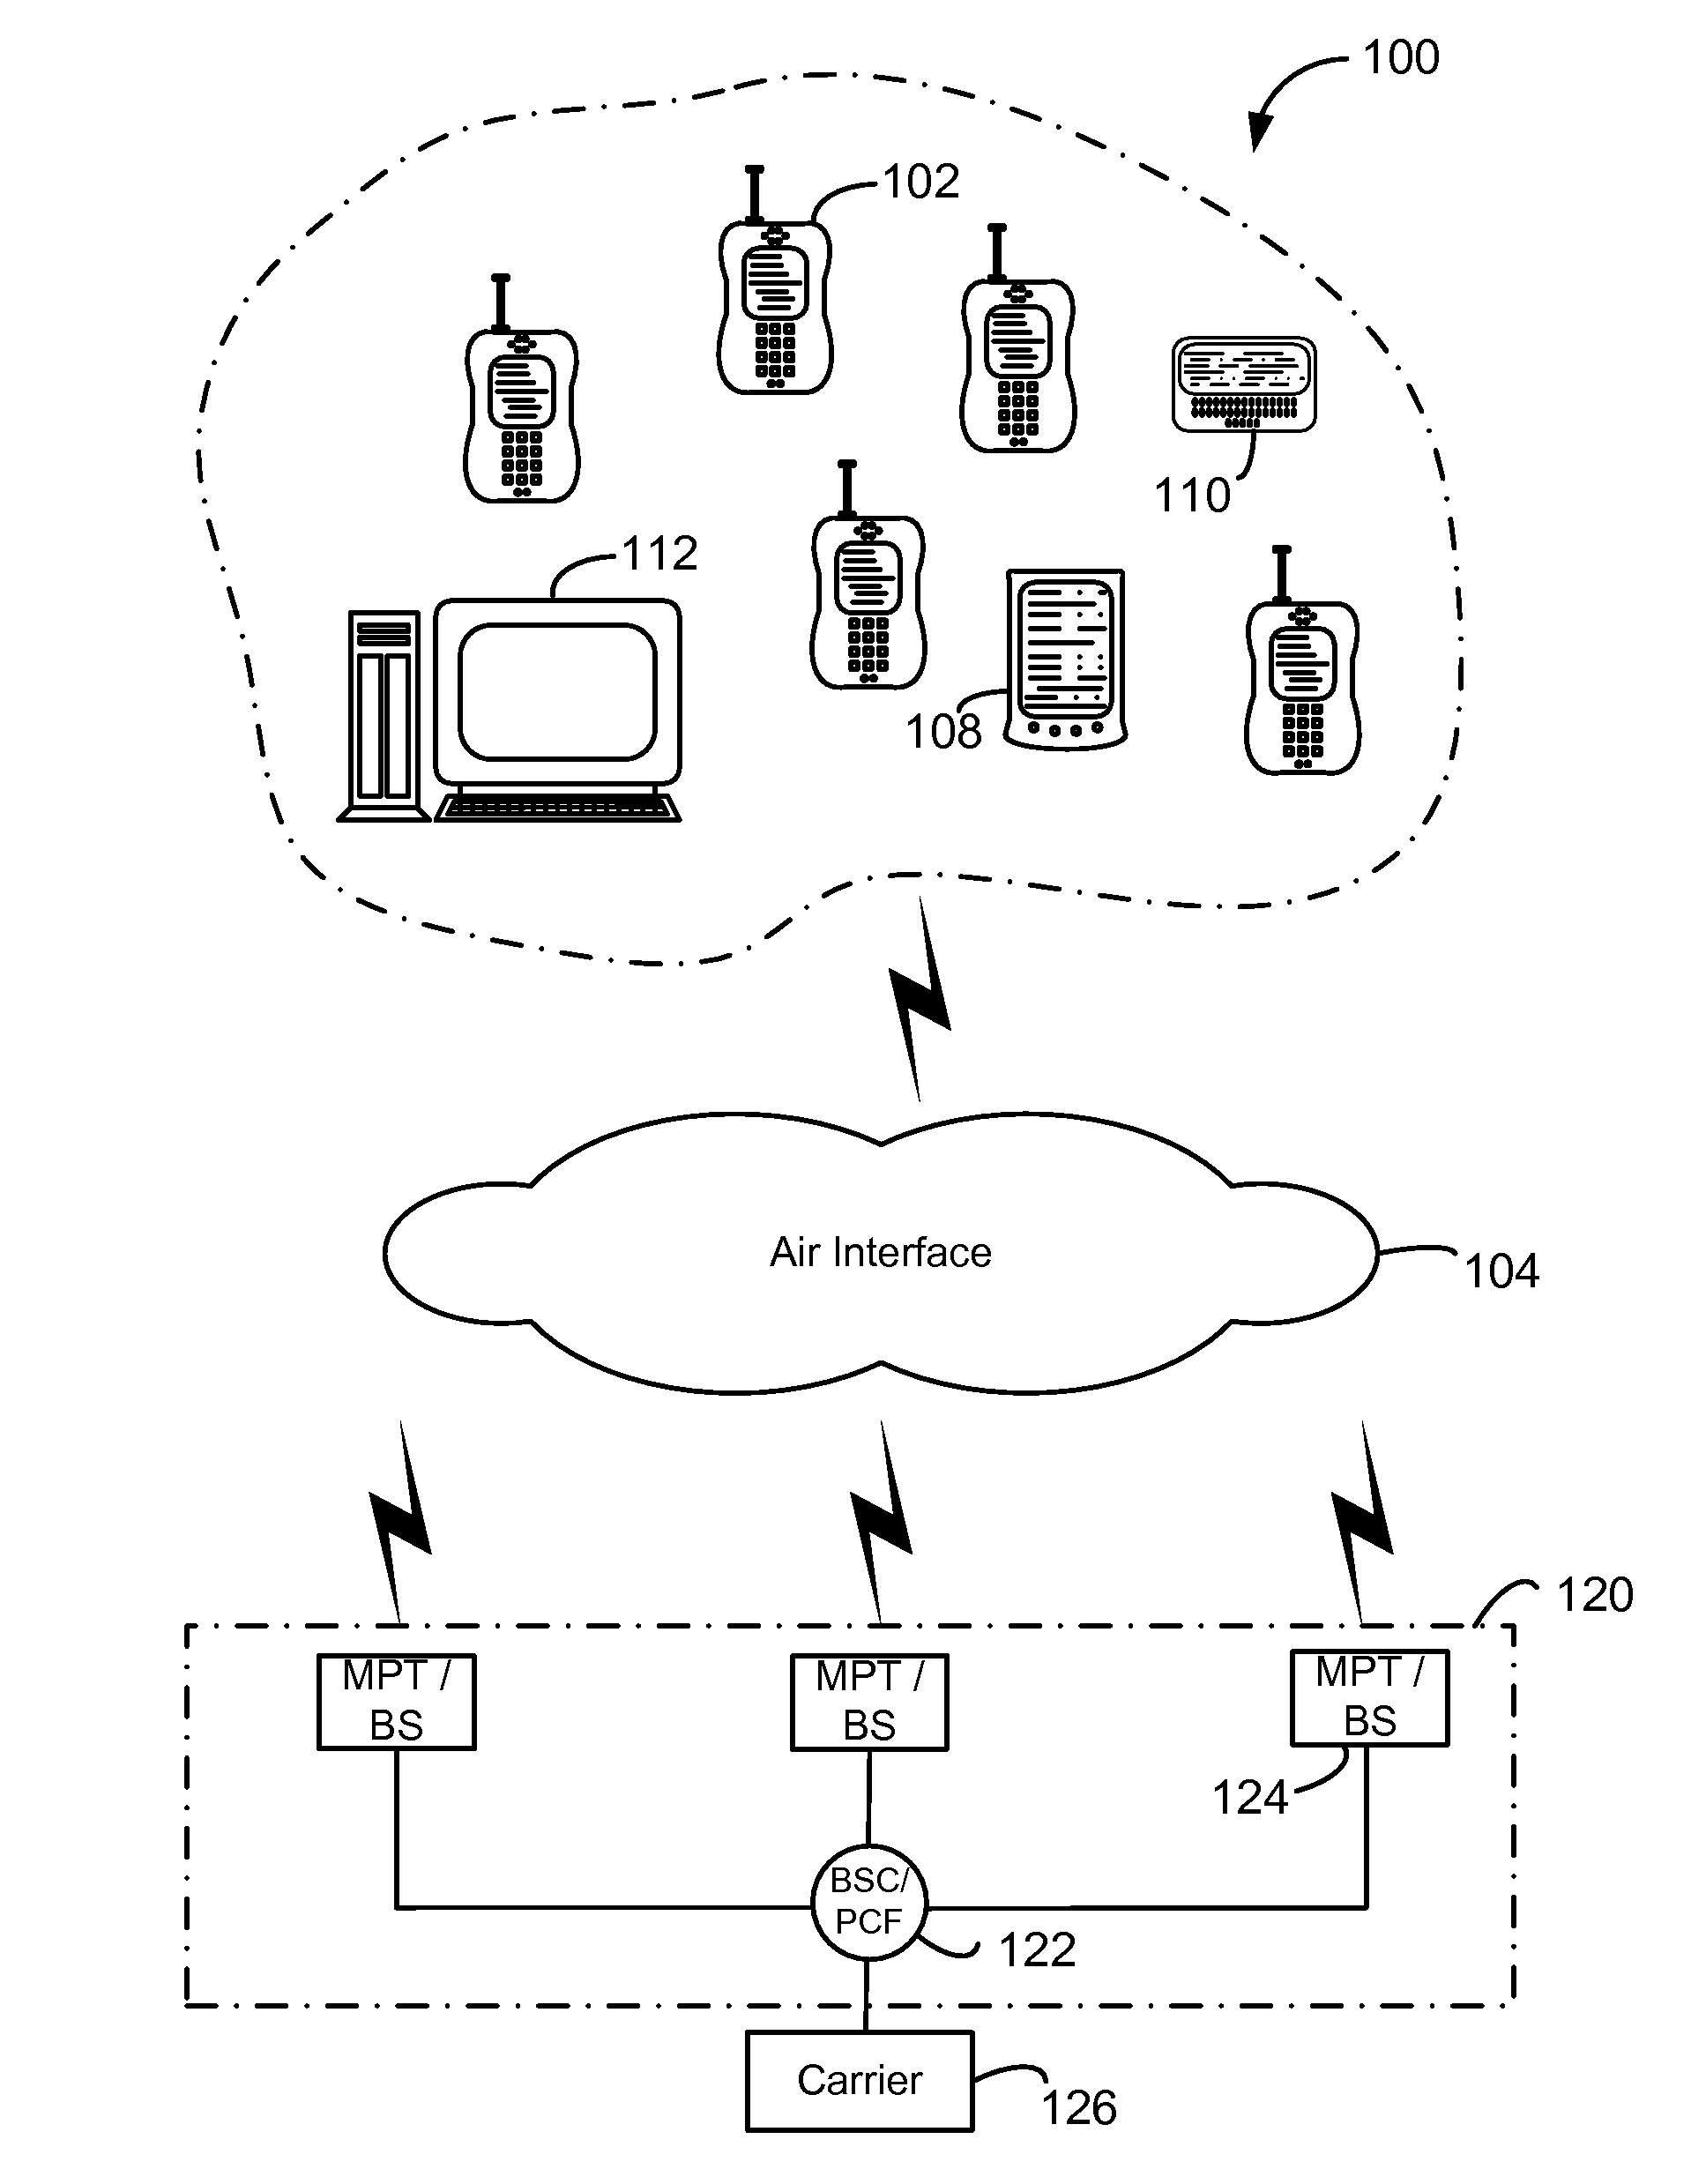 Mobility management of multiple clusters within a wireless communications network